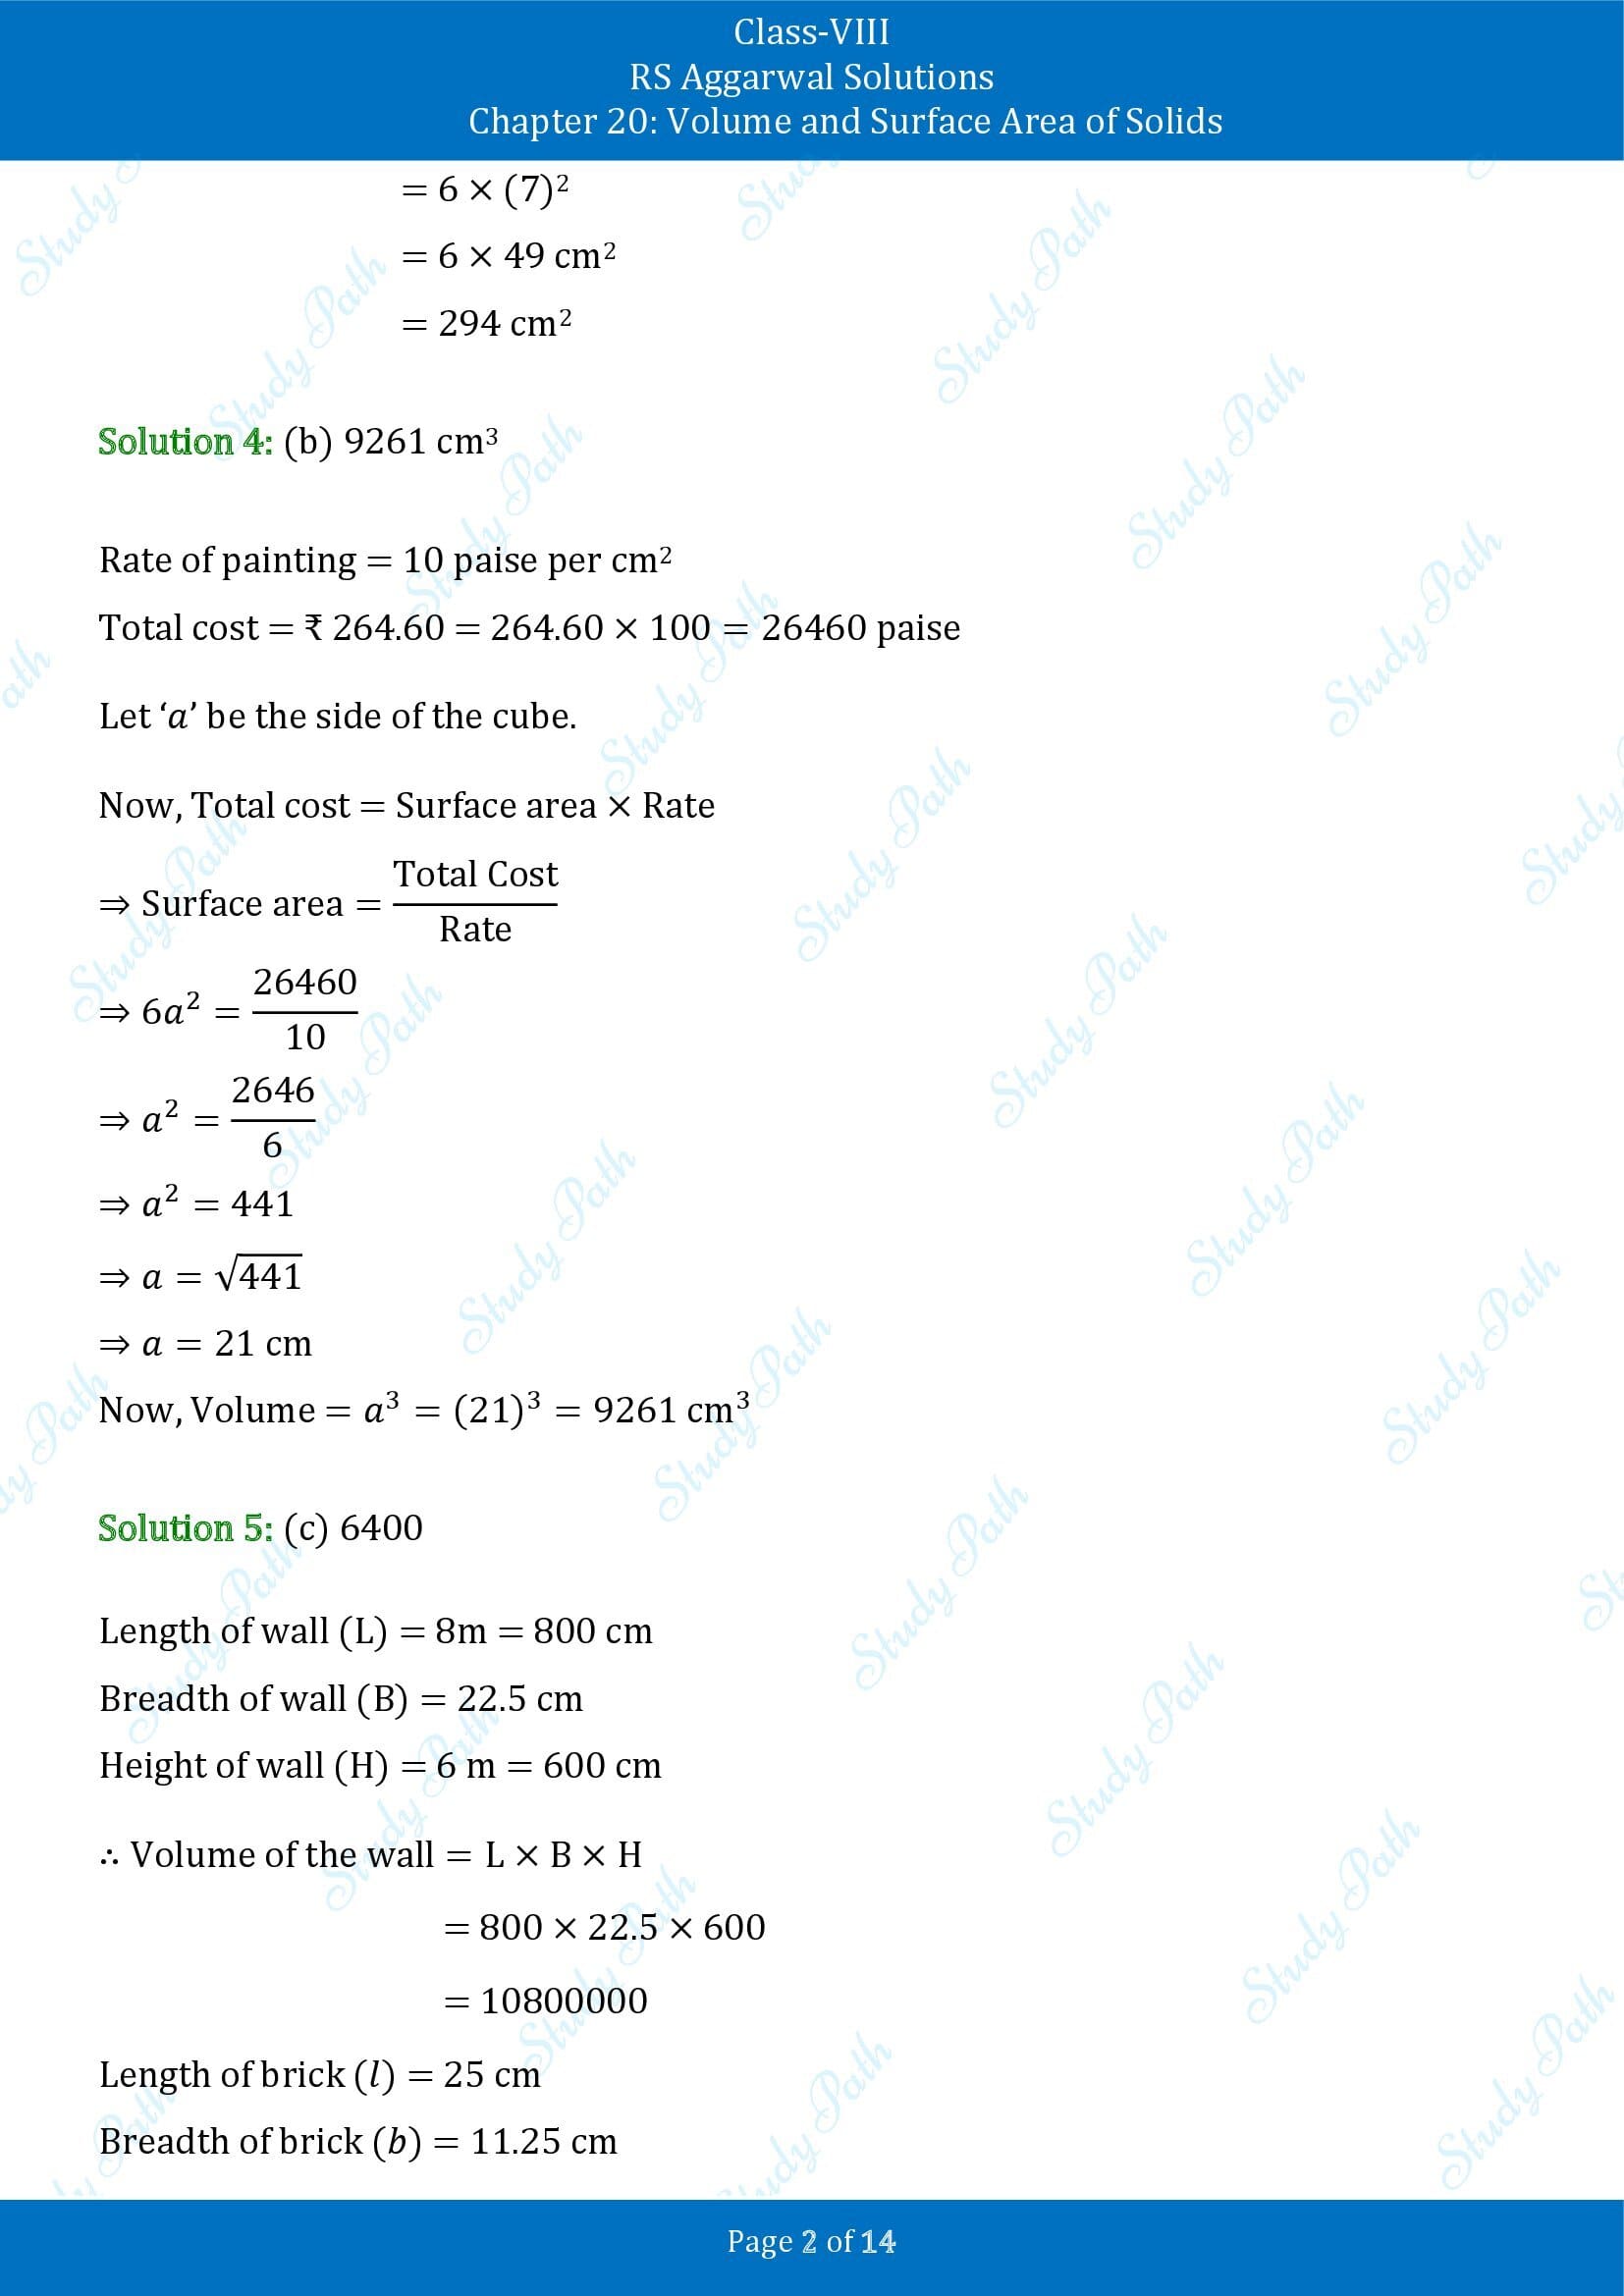 RS Aggarwal Solutions Class 8 Chapter 20 Volume and Surface Area of Solids Exercise 20C MCQs 00002